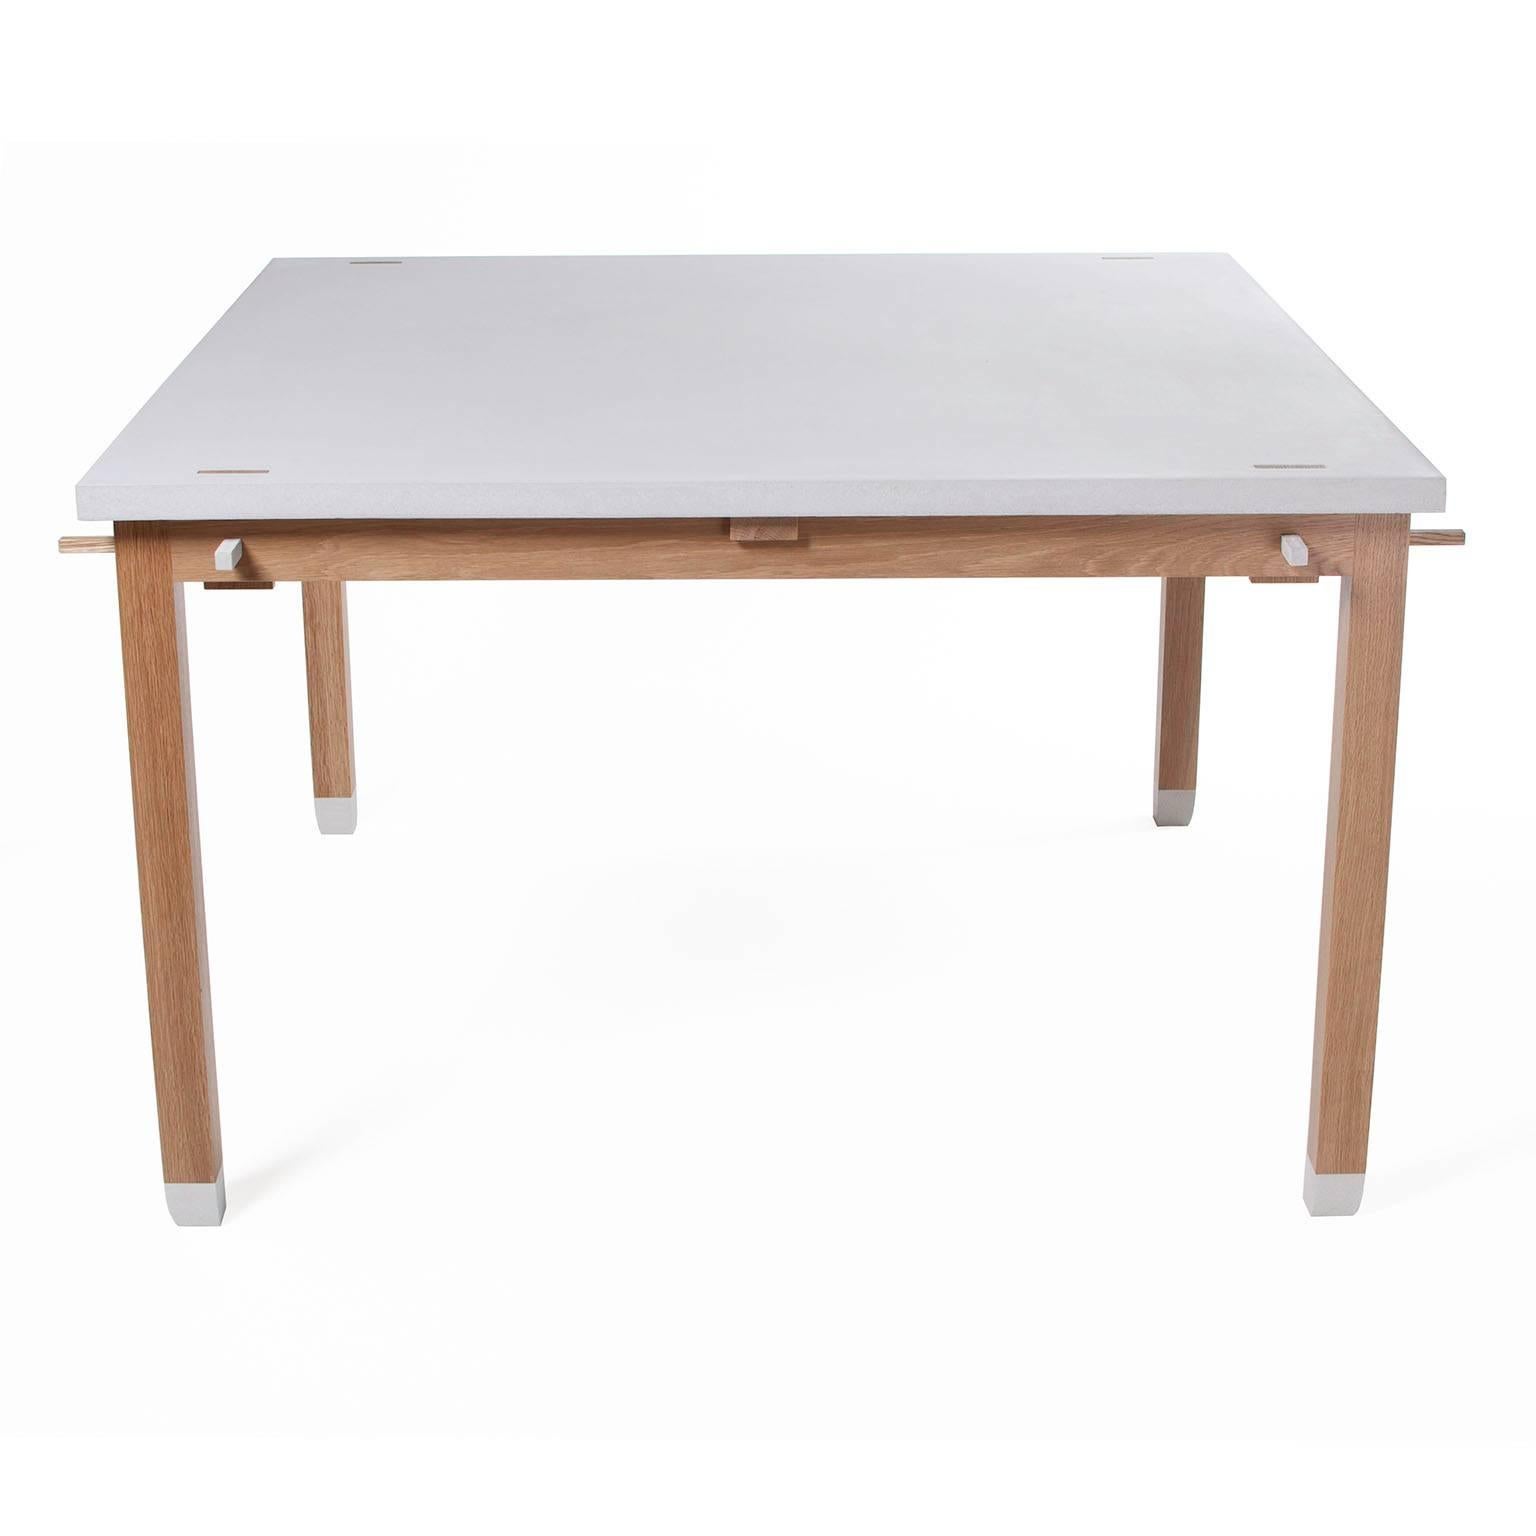 Garden table
Measures: 122, 122, 75 ( 48" square 29.5" high )
cast concrete and white oak
conversion varnish durable finish

In stunning light natural grey cast concrete and naturally decay resistant white oak, this square dining